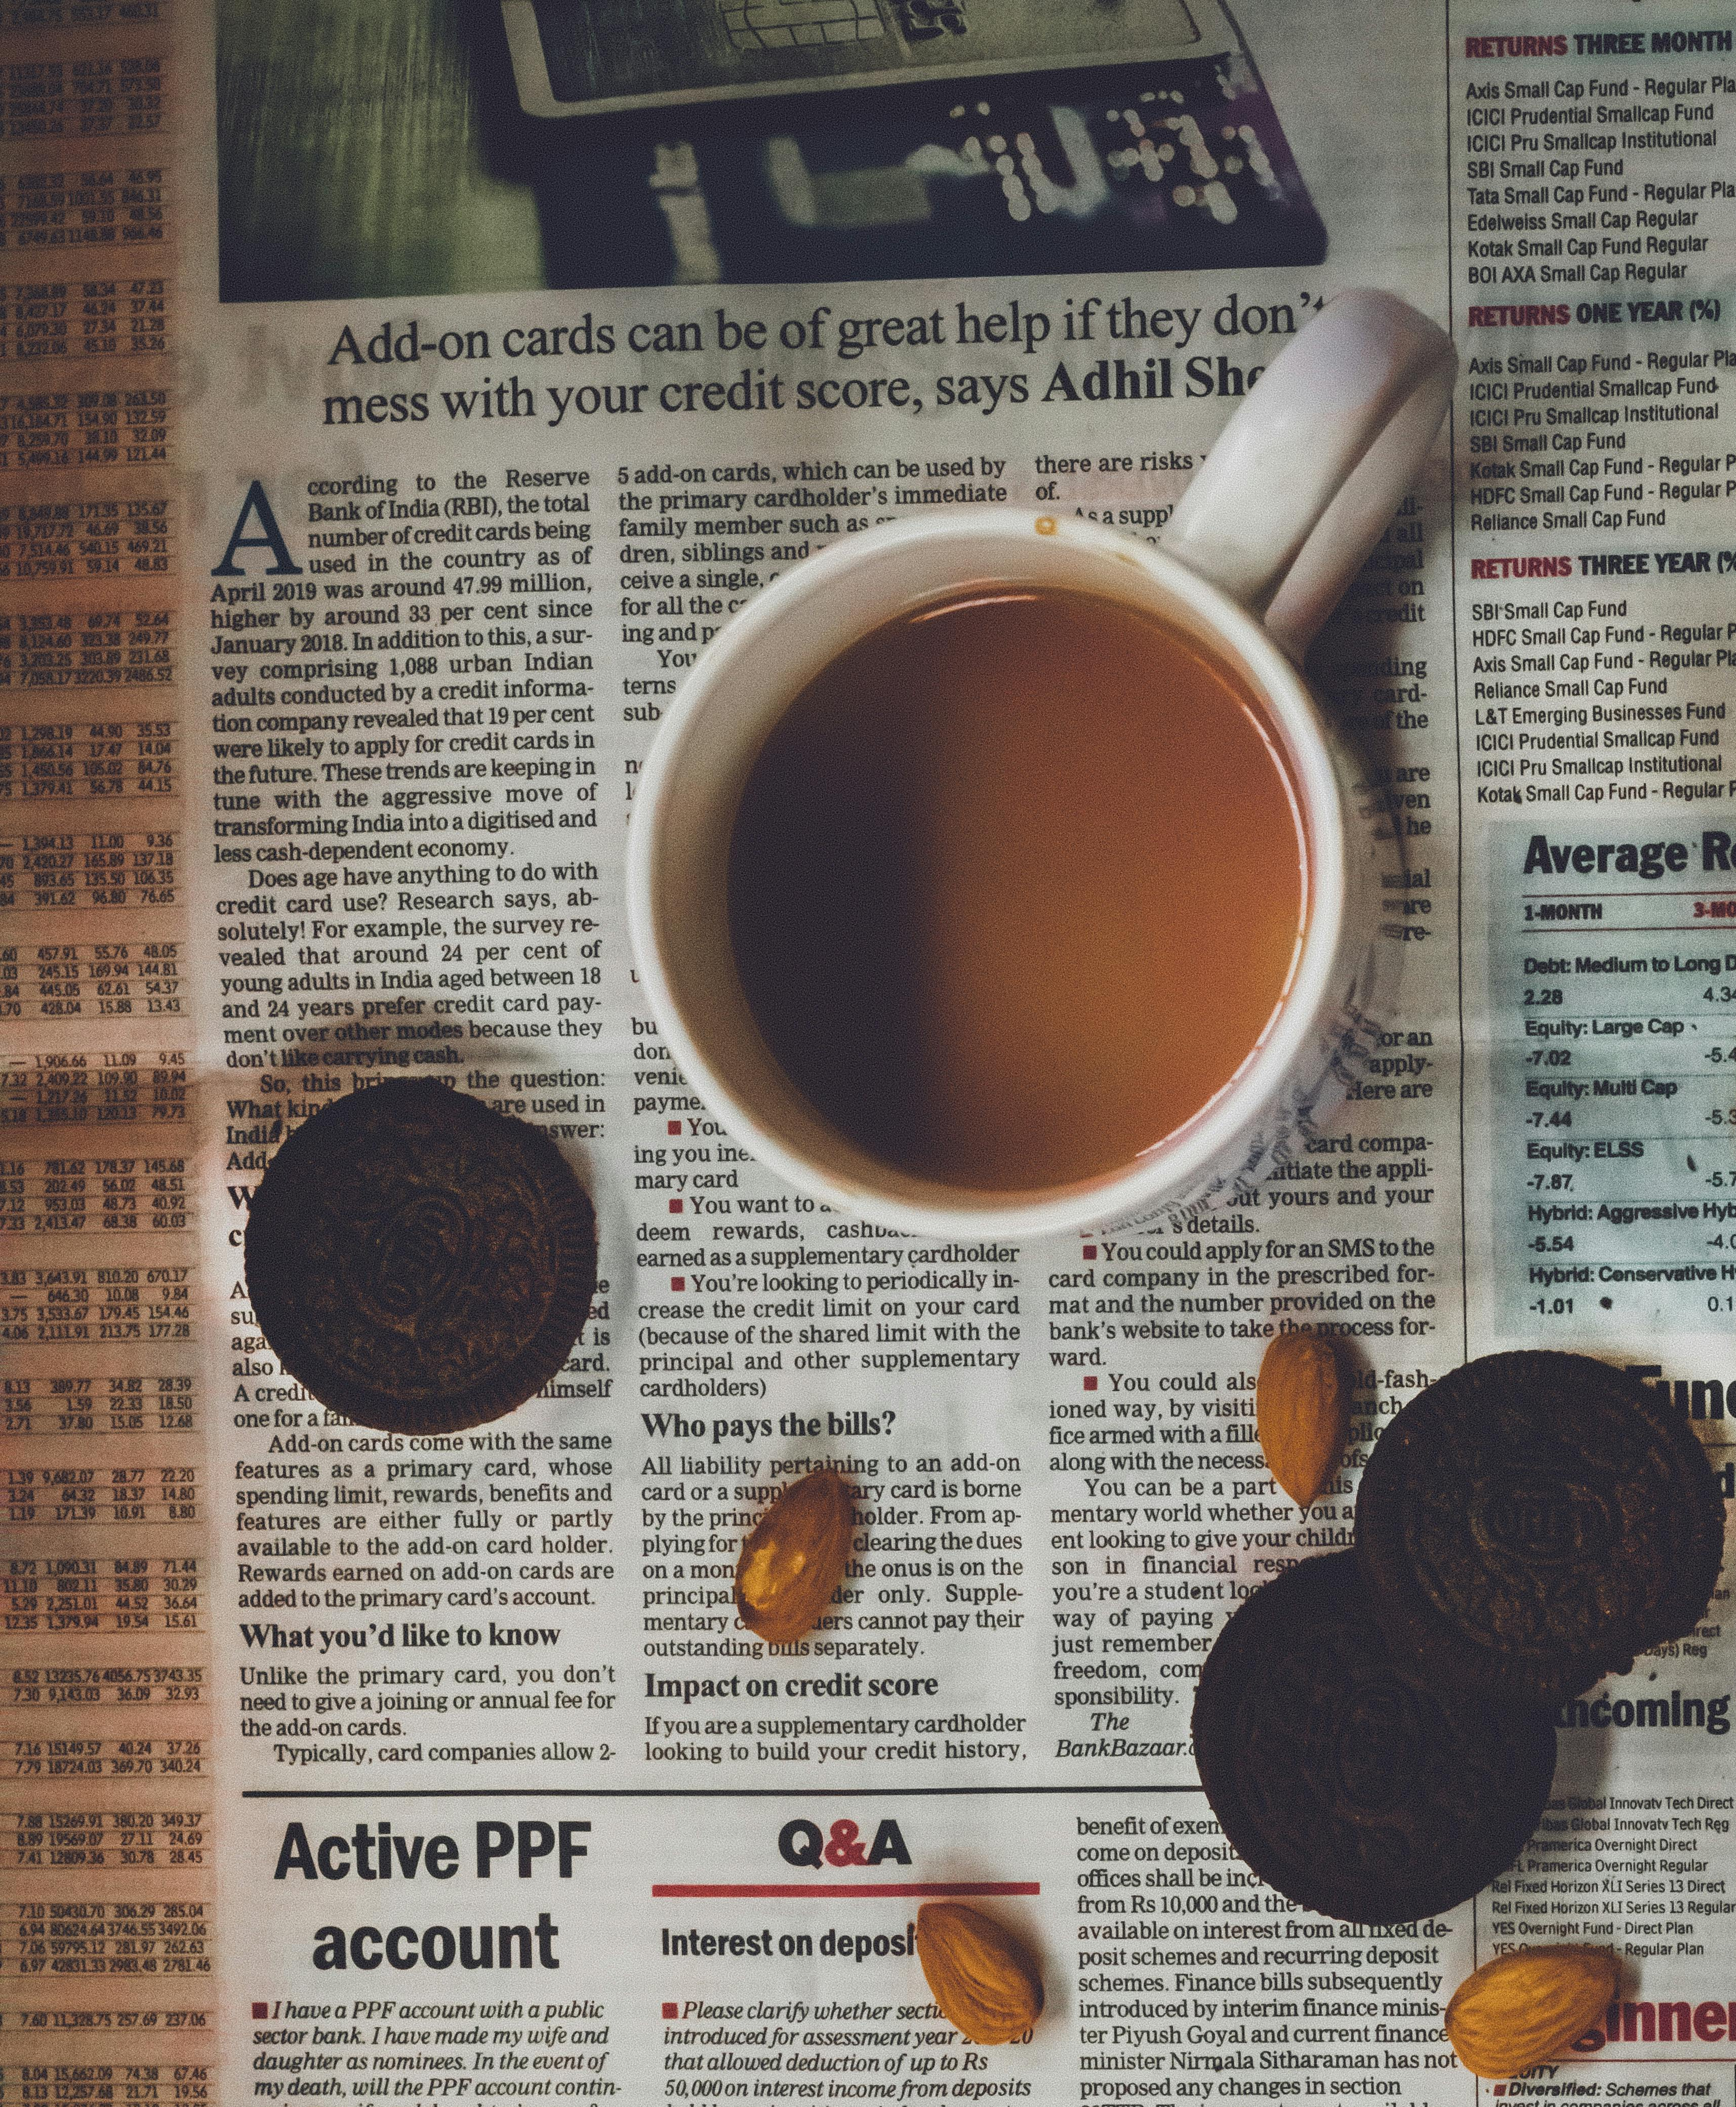 A cup of coffee, cookies, and almonds rest on a newspaper.